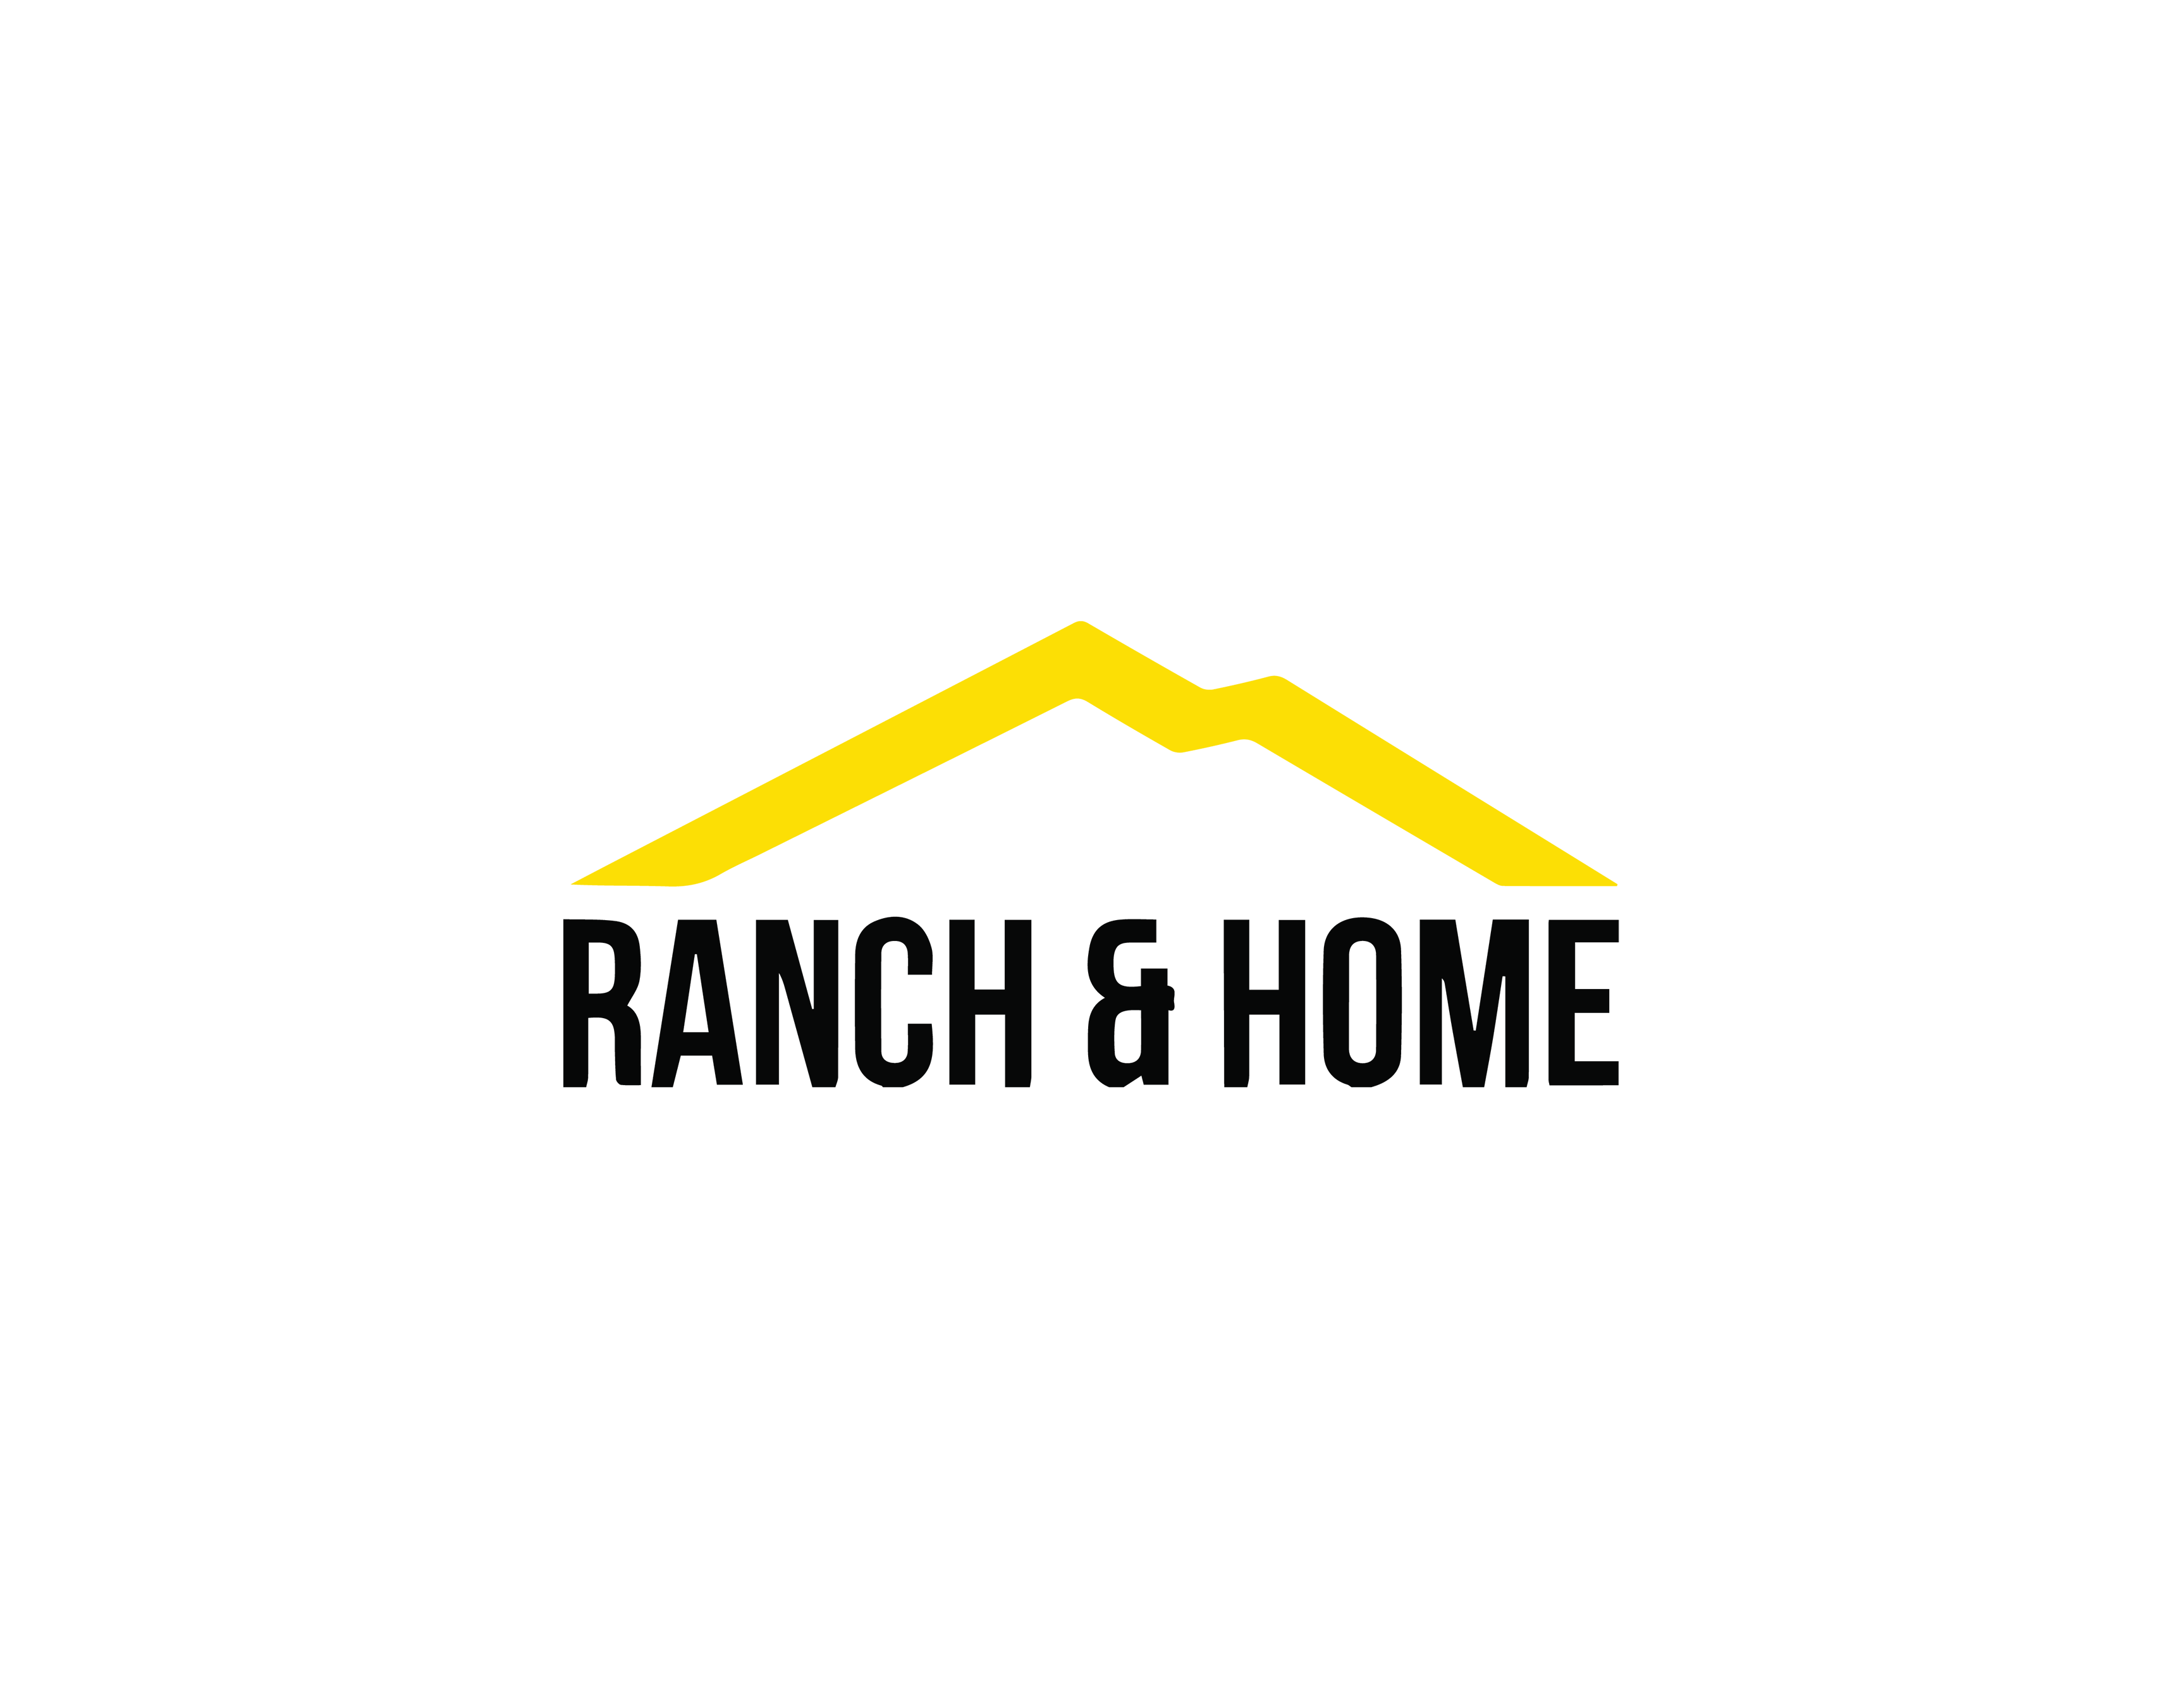 Ranch&Home